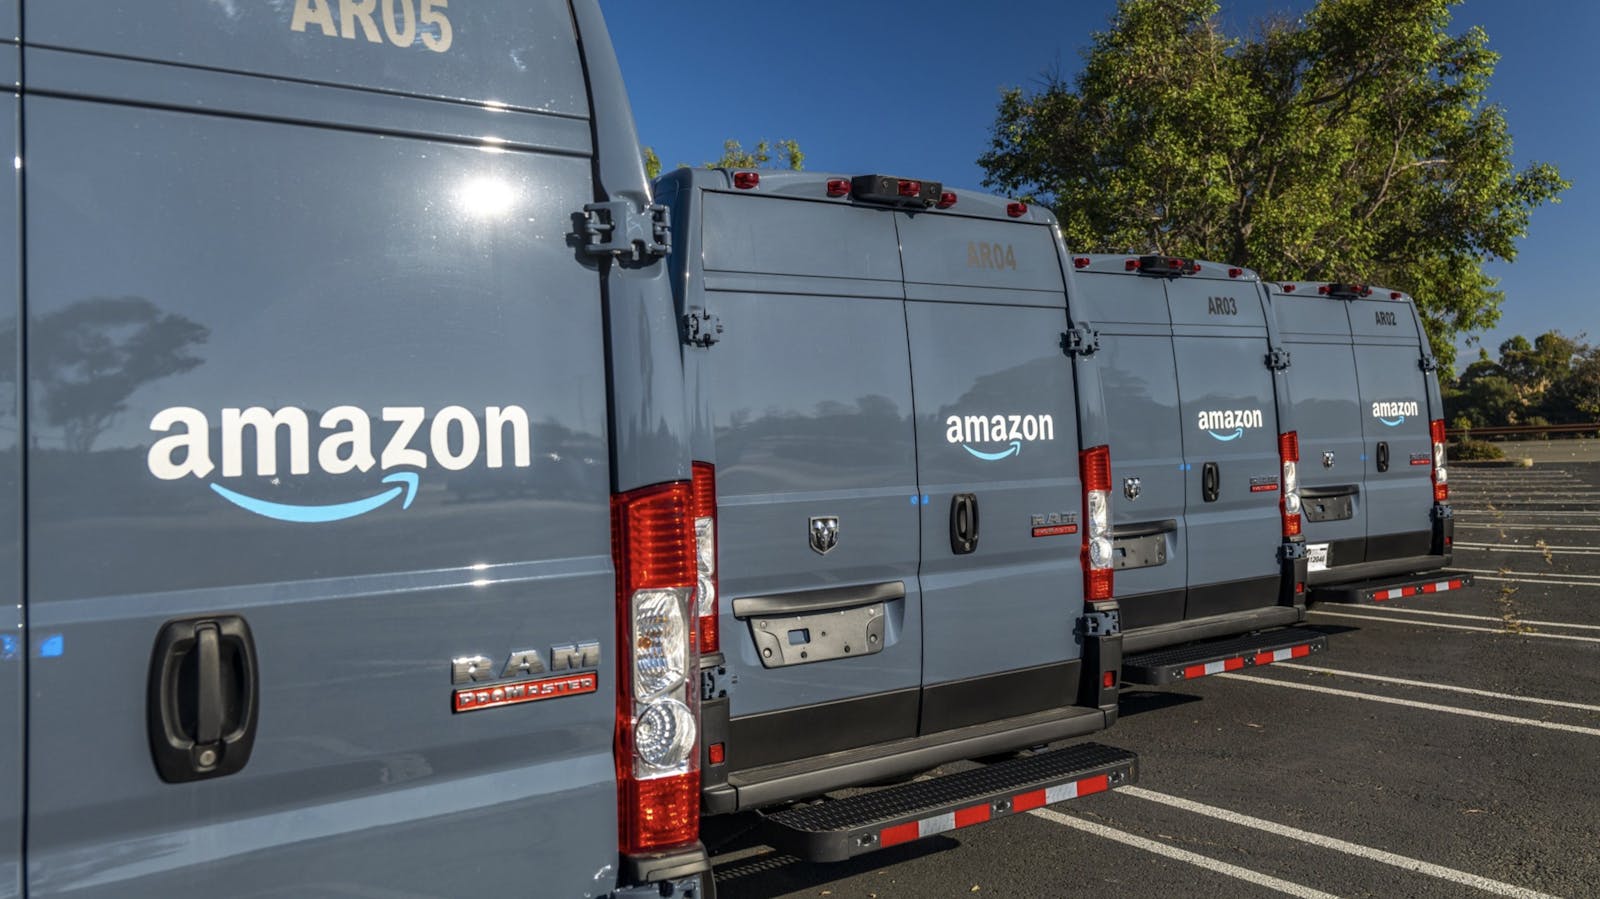 Amazon delivery trucks in Richmond, Calif. on Tuesday. Photo by Bloomberg